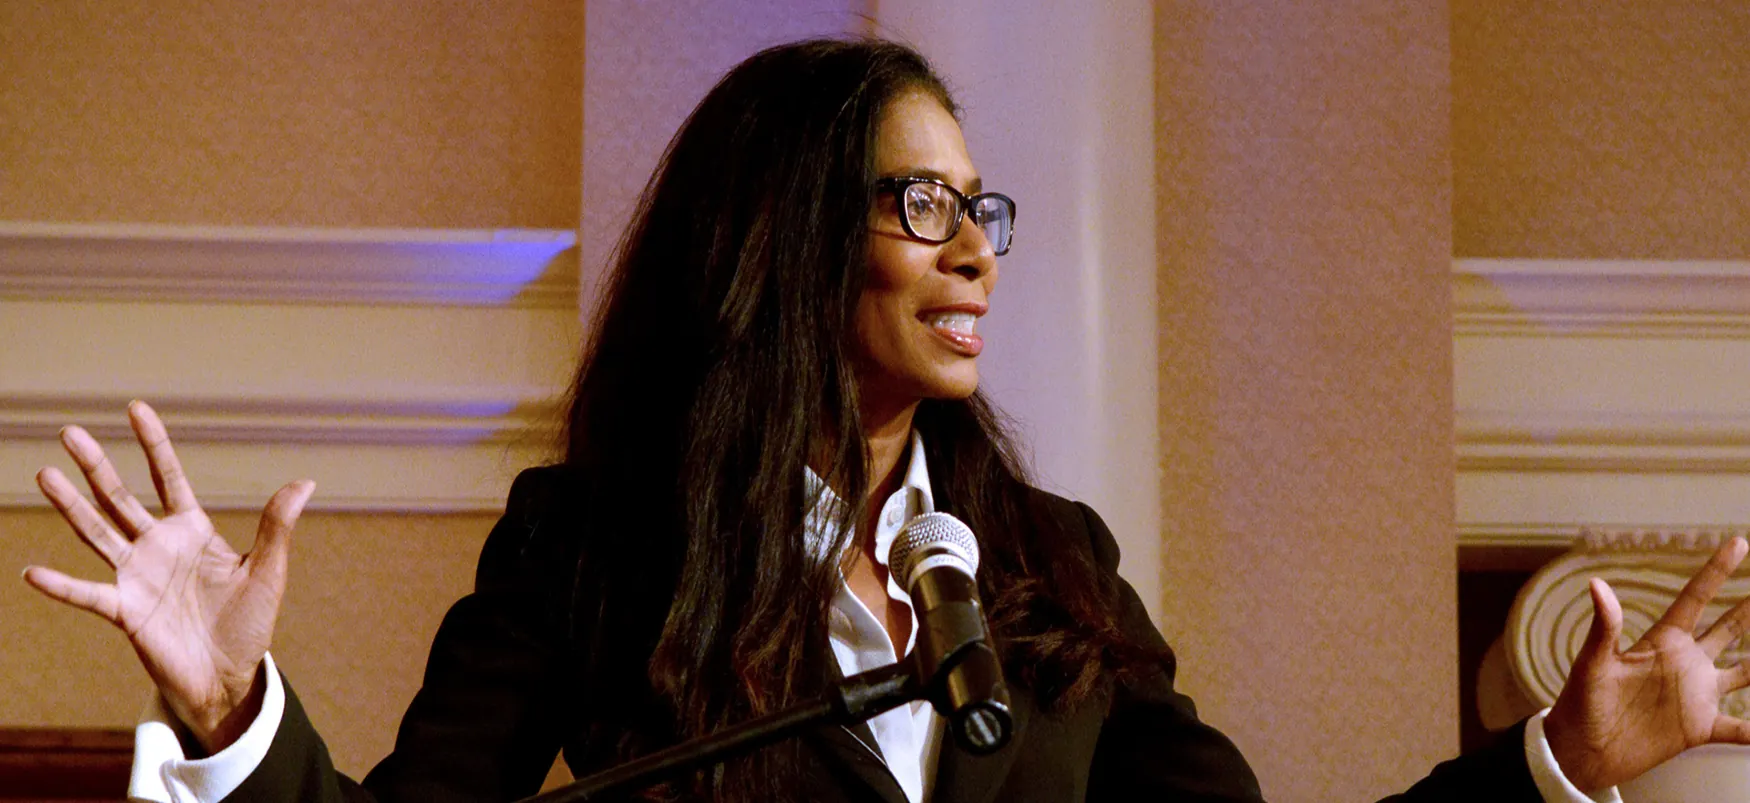 A female in business attire stands at a microphone and speaks.